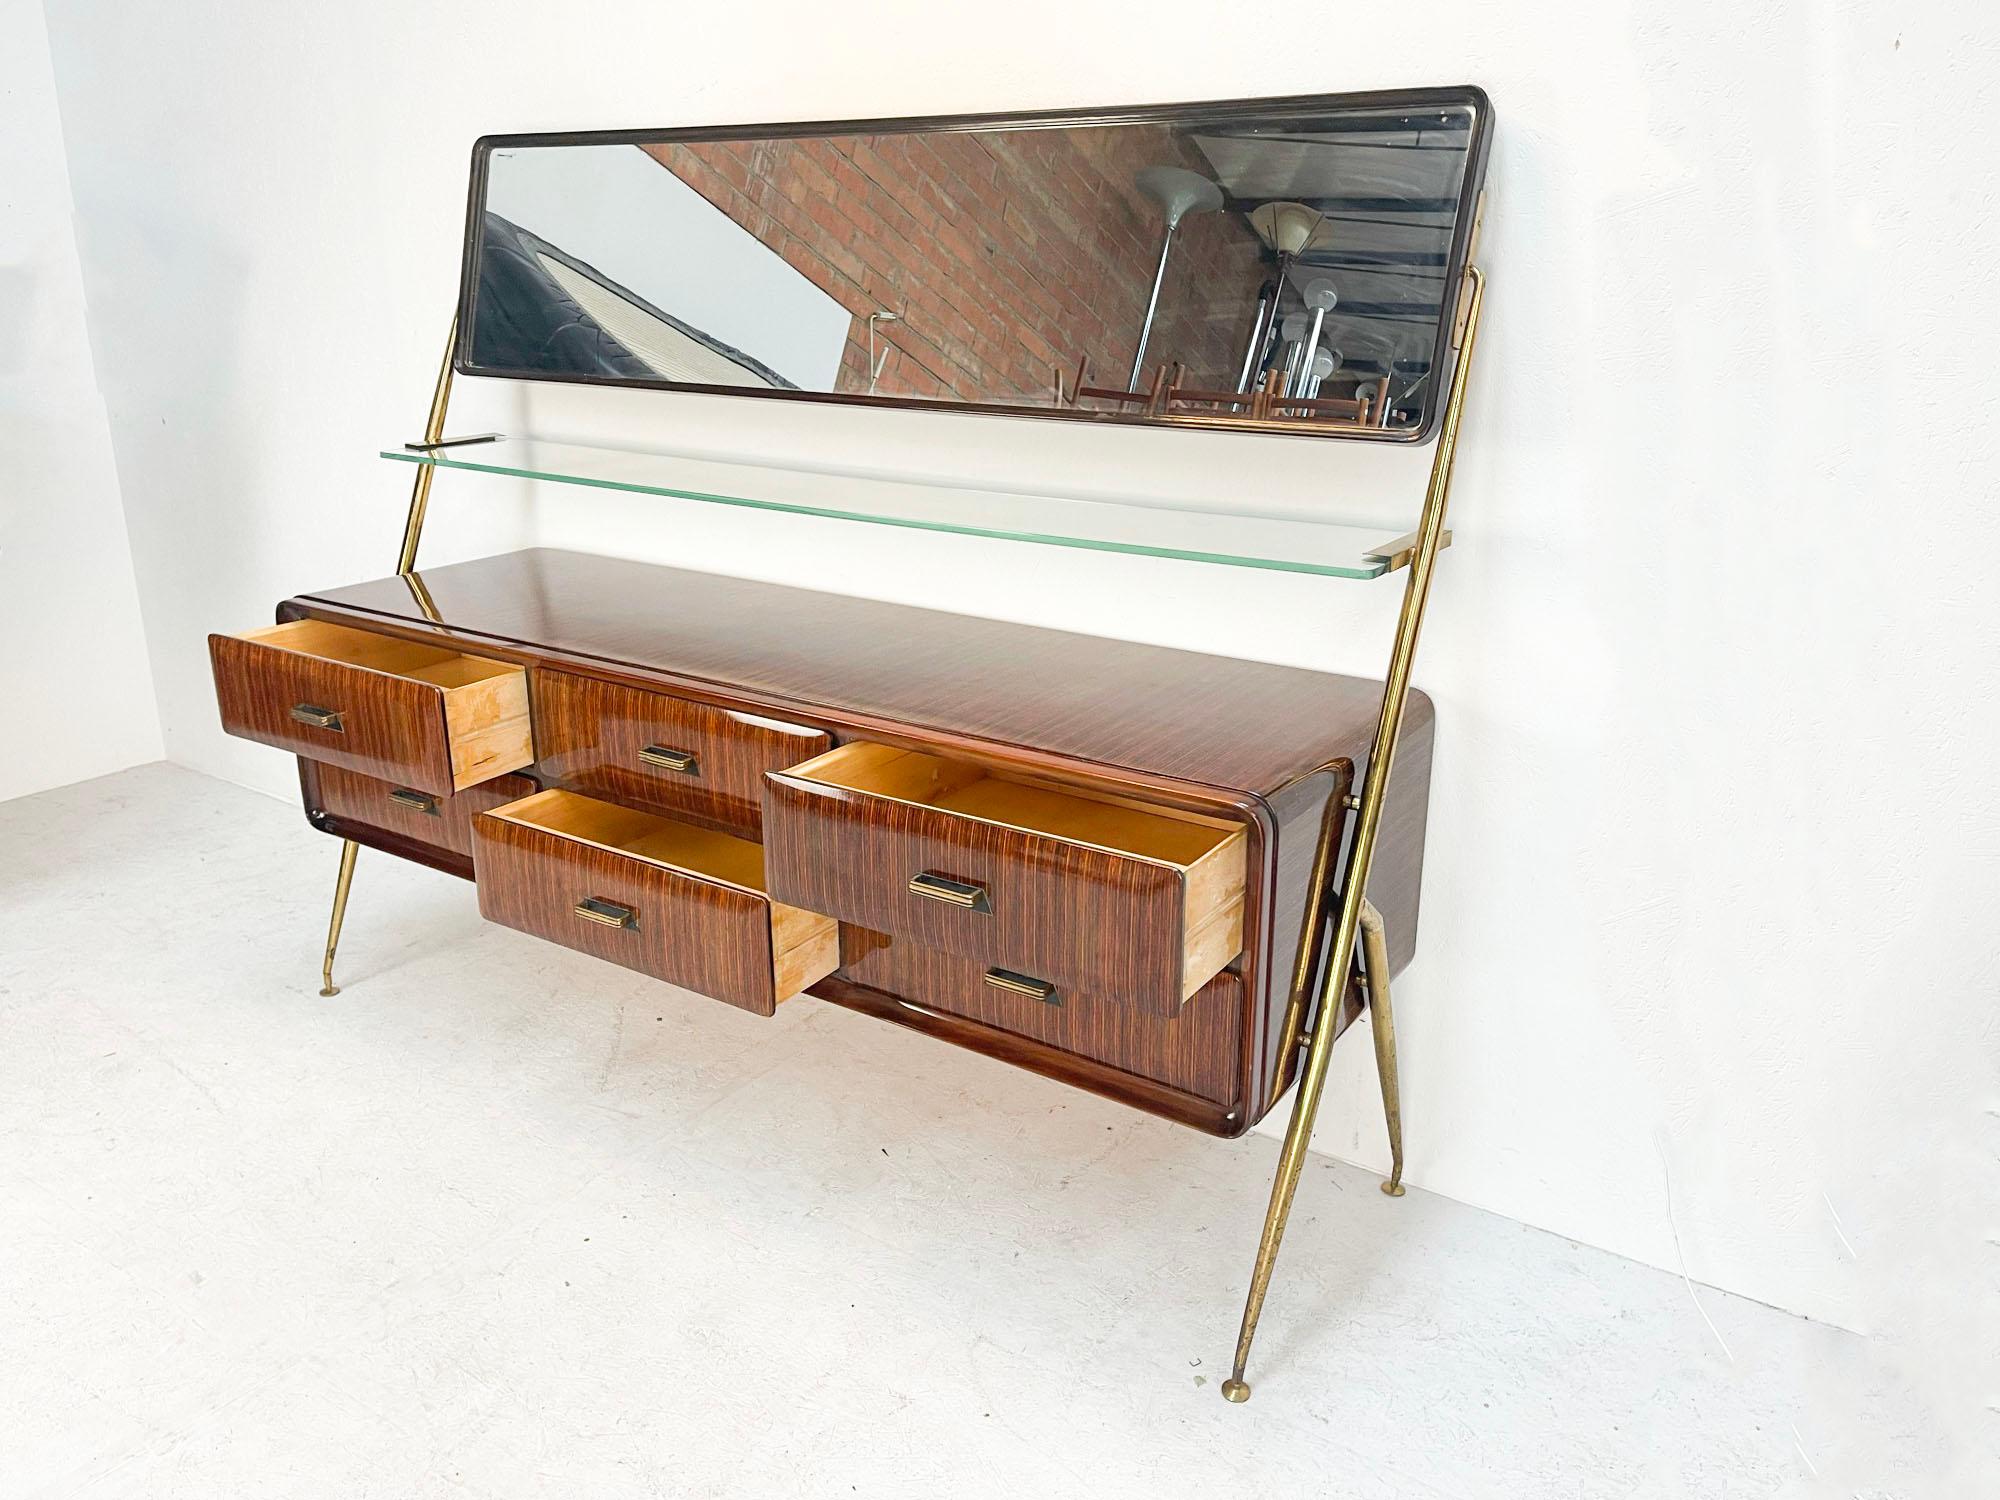 A true Italian Beauty! 

Beautiful sideboard designed and manufactured by Silvio Cavatorta, Italy in 1958. This sideboard is a perfect example of Italian craftsmanship. The sideboard is made of high gloss lacquered teak wood with a brass